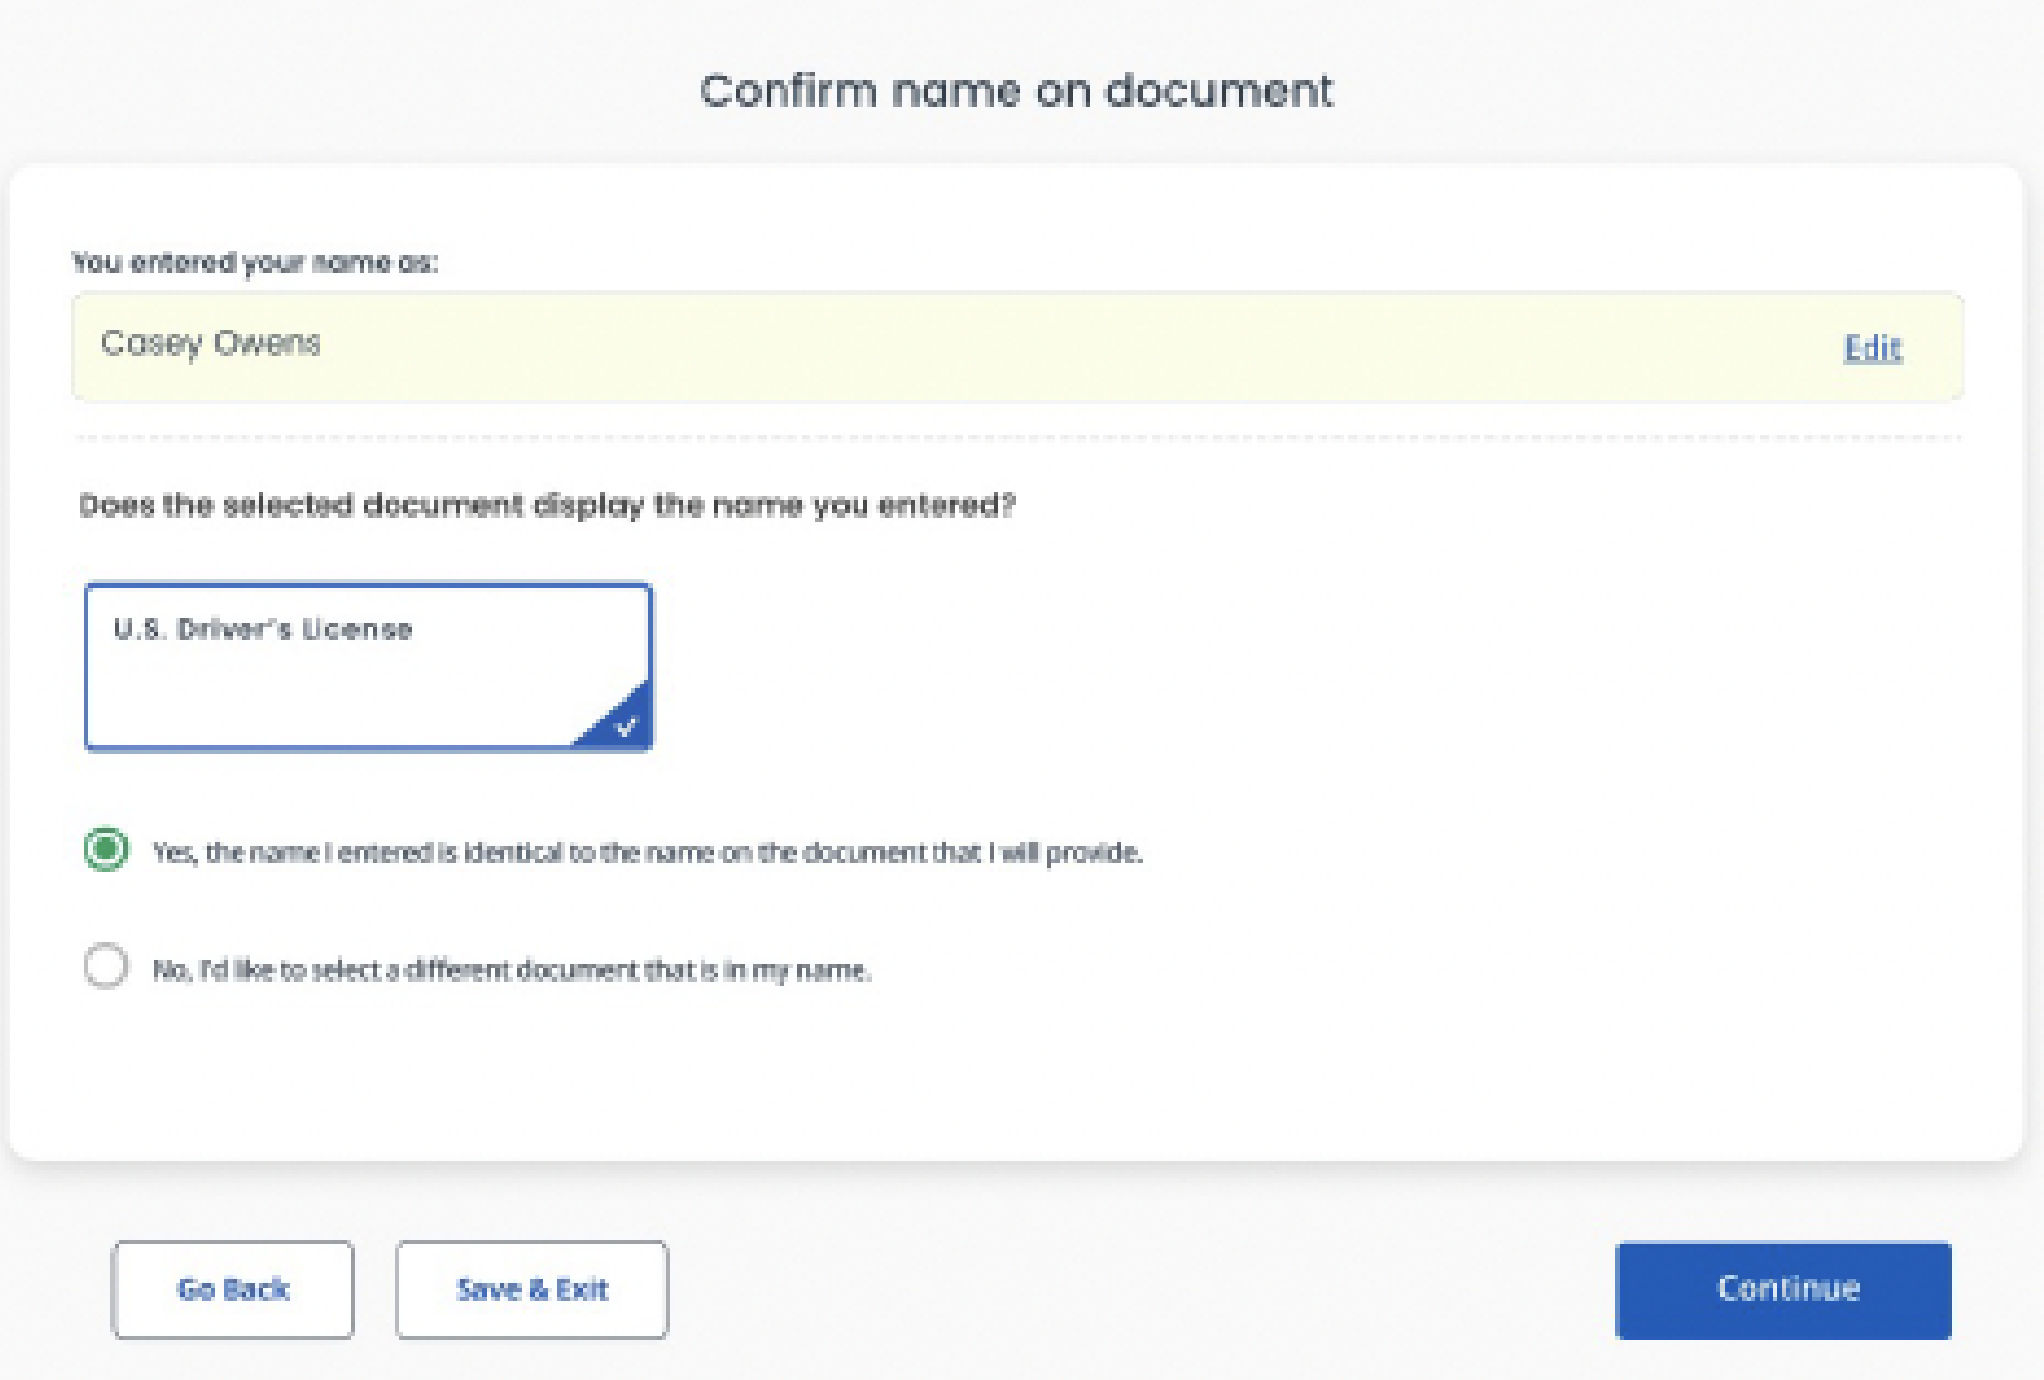 Confirm_the_name_on_the_document_matches_the_name_previously_entered_and_select_Continue_step9-01.png